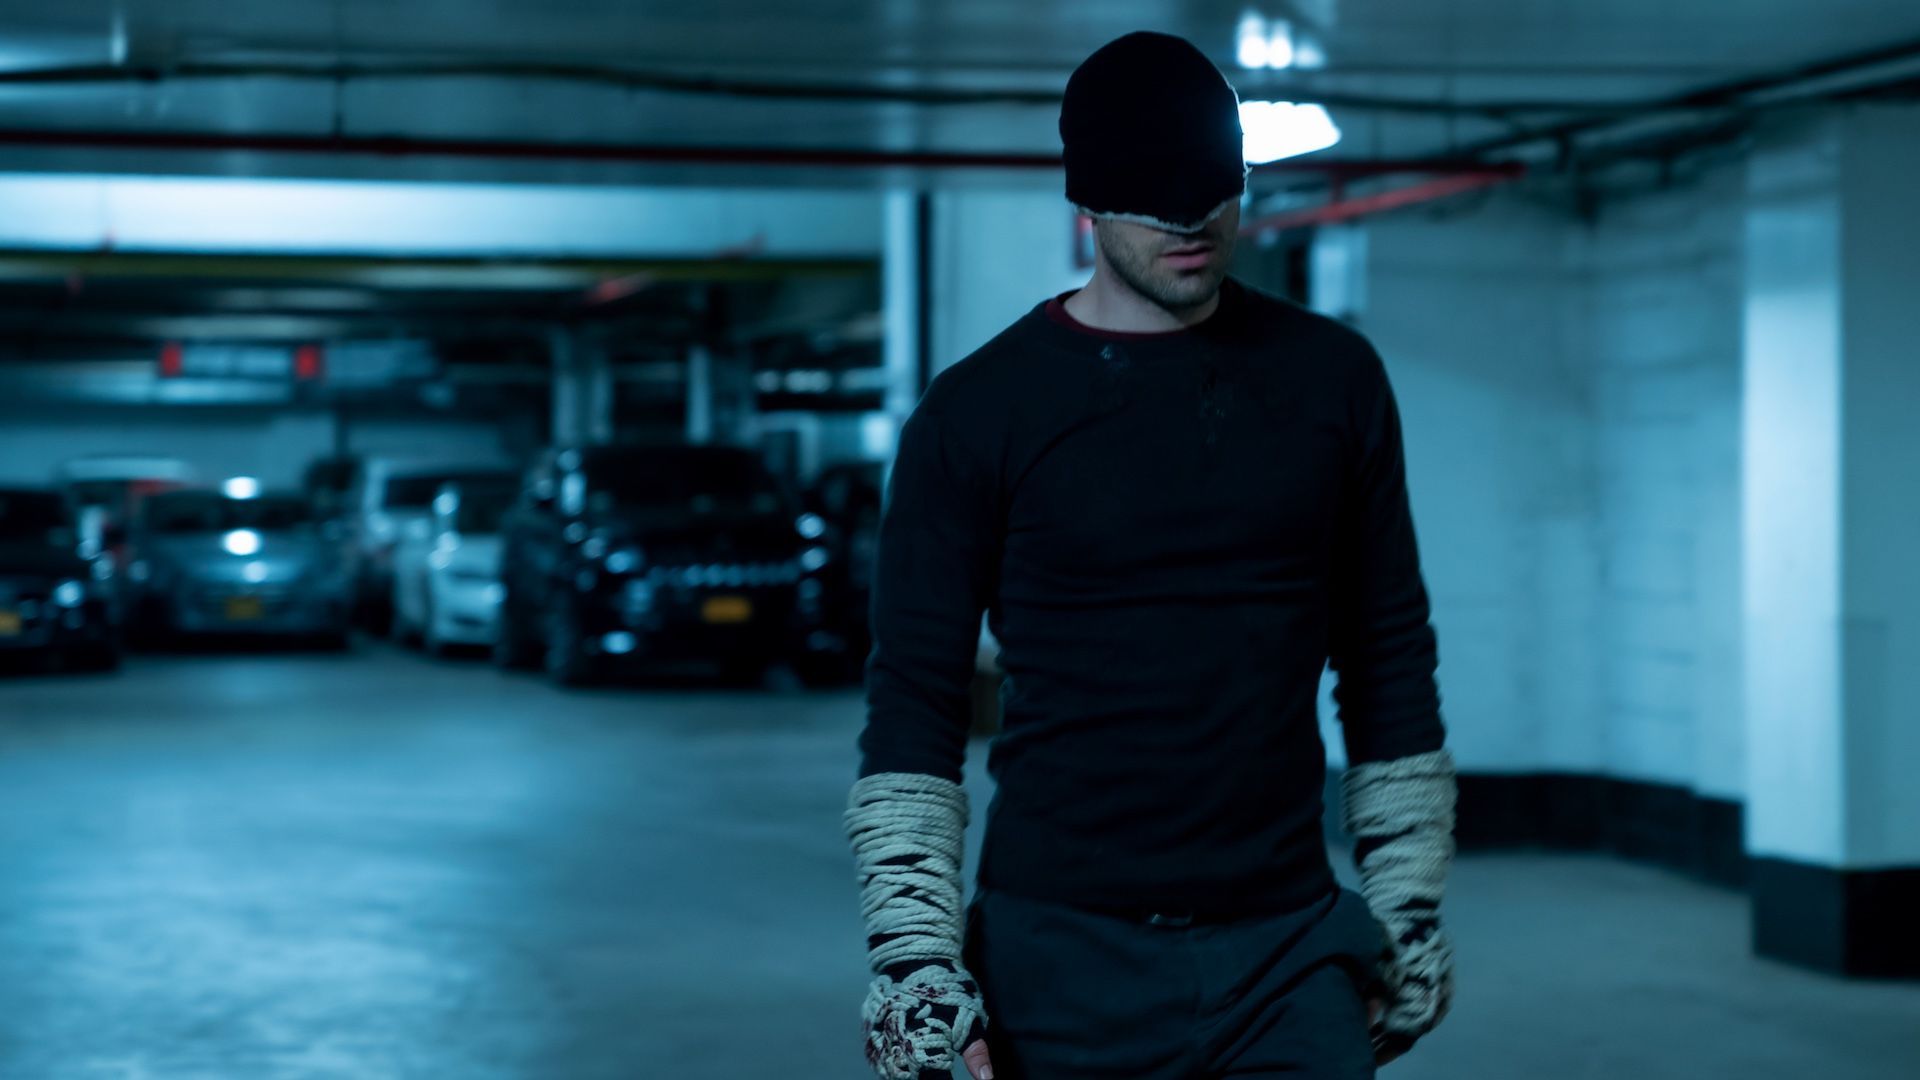 Here's The Reason Why Daredevil is Wearing His Black Suit Again in Season 3